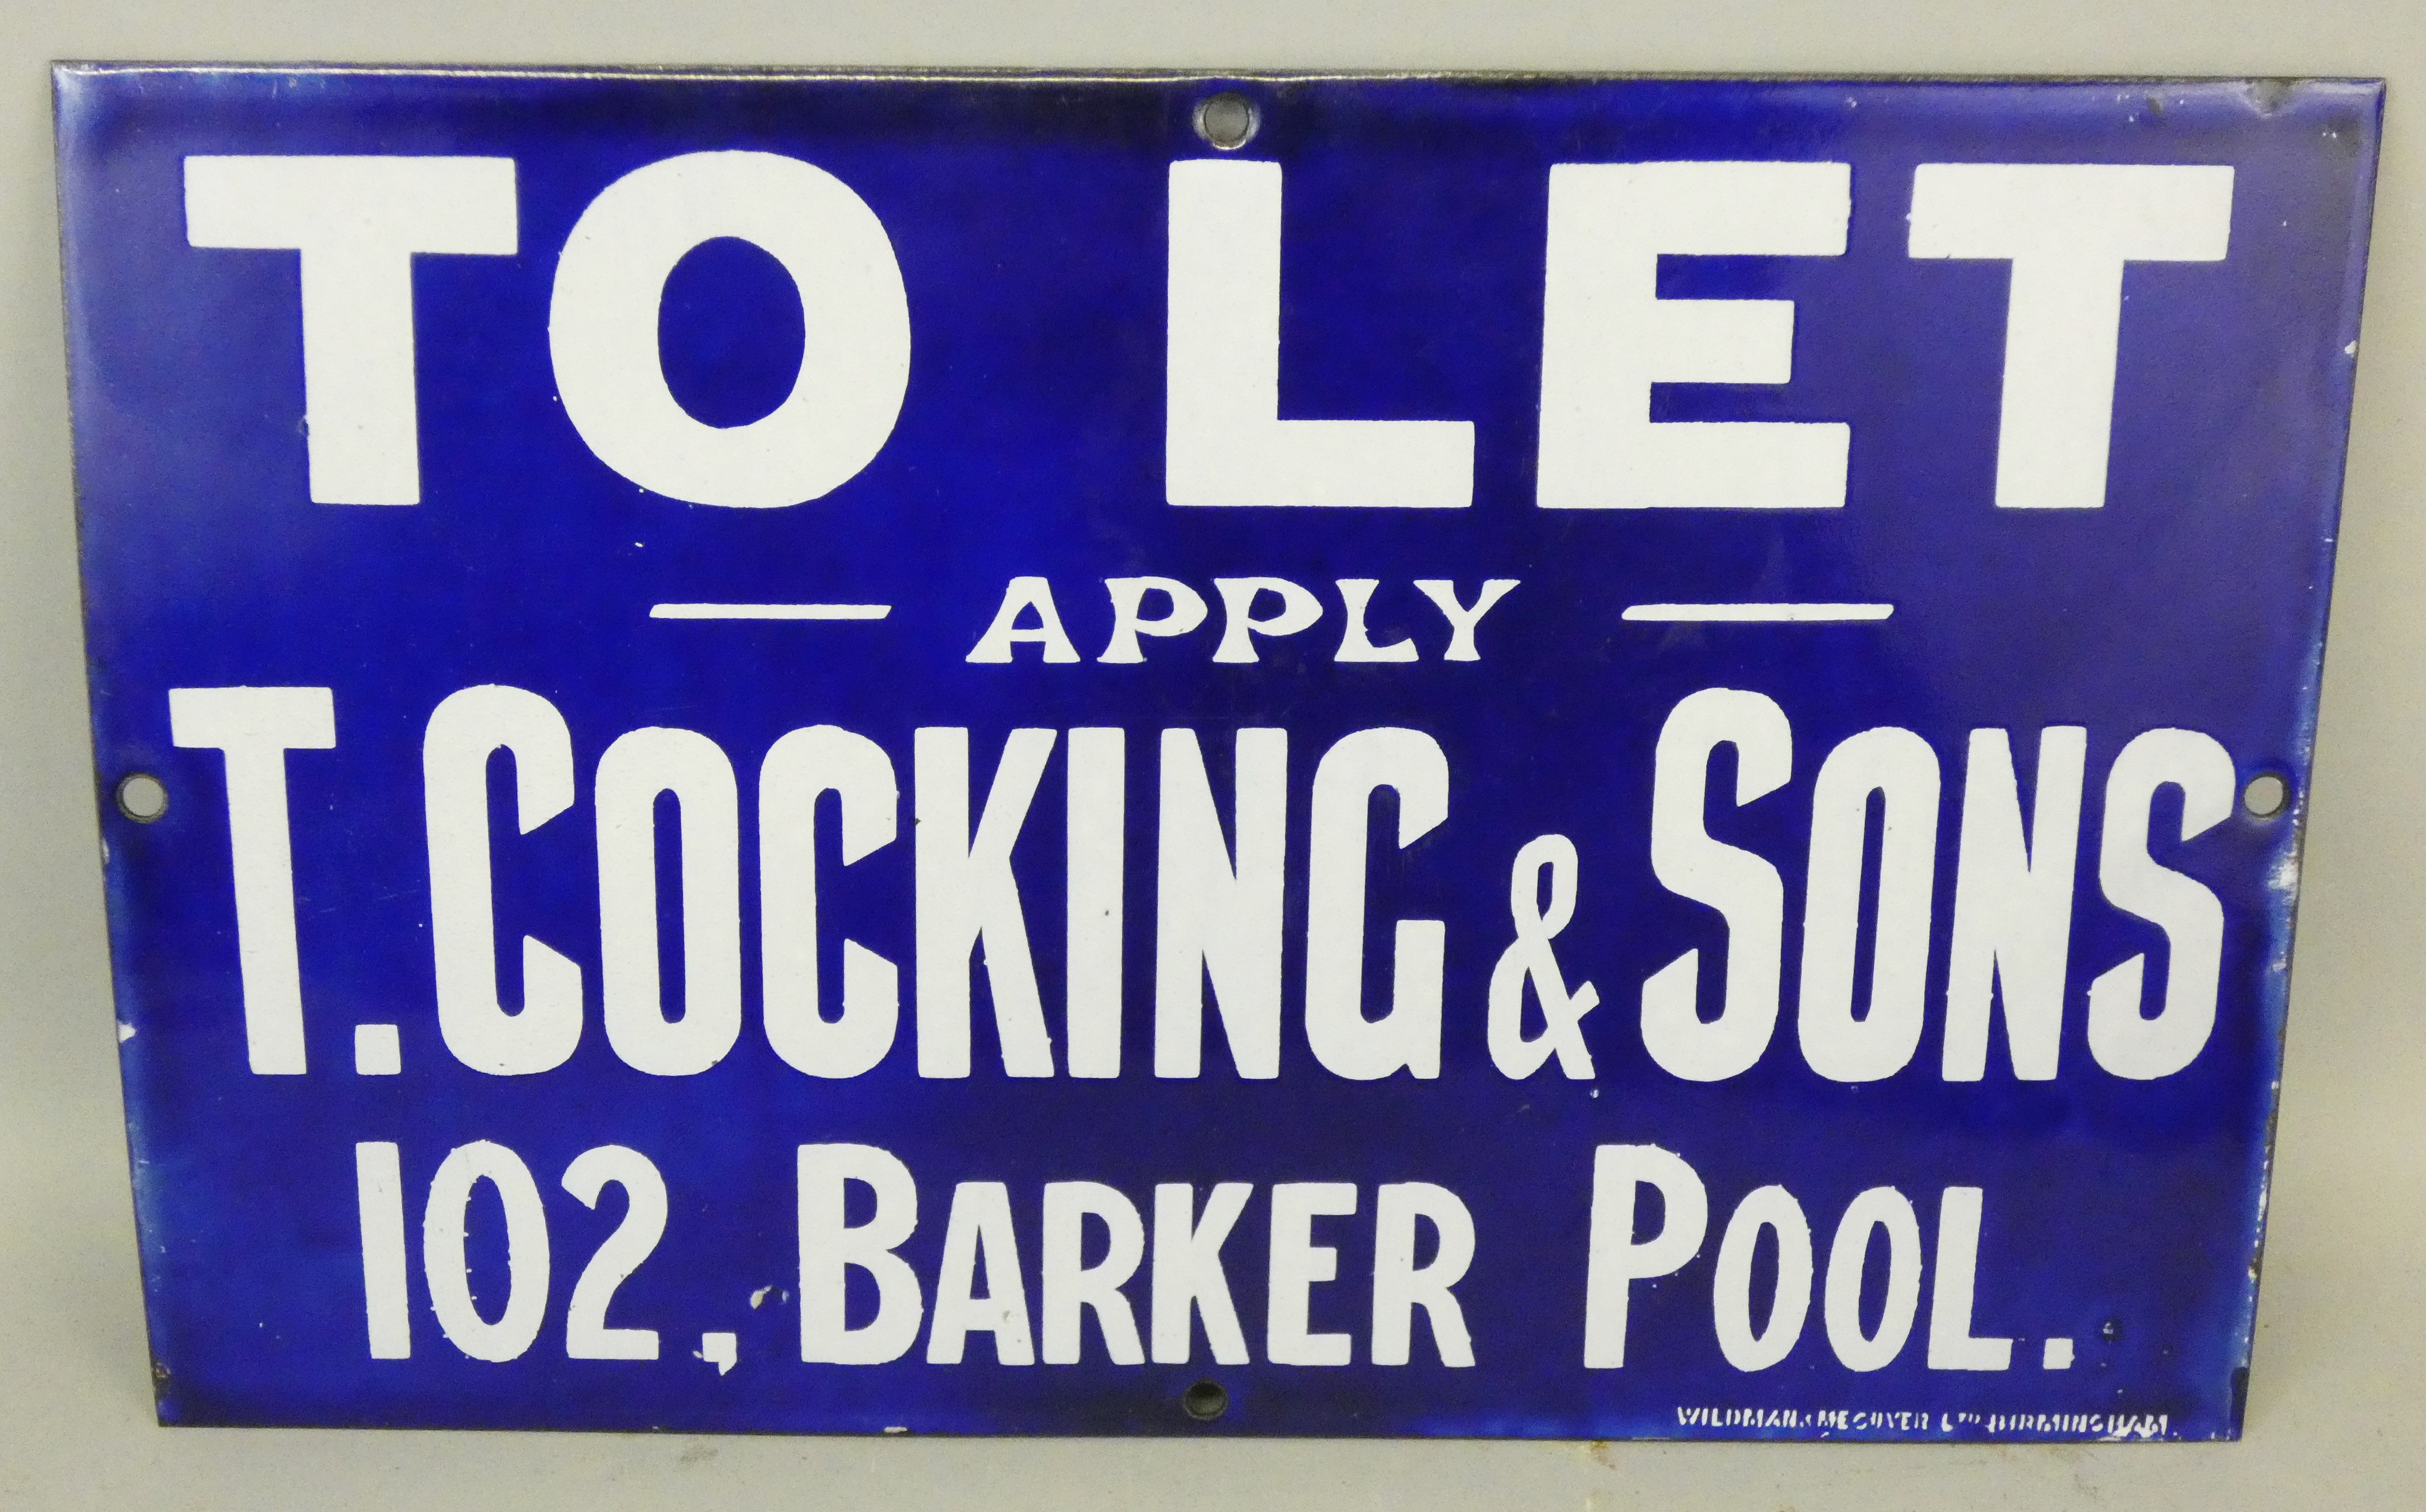 A vintage enamel single sided wall mounted sign for T. Cocking & Sons, 102 Barker Pool, 23 x 35.5.